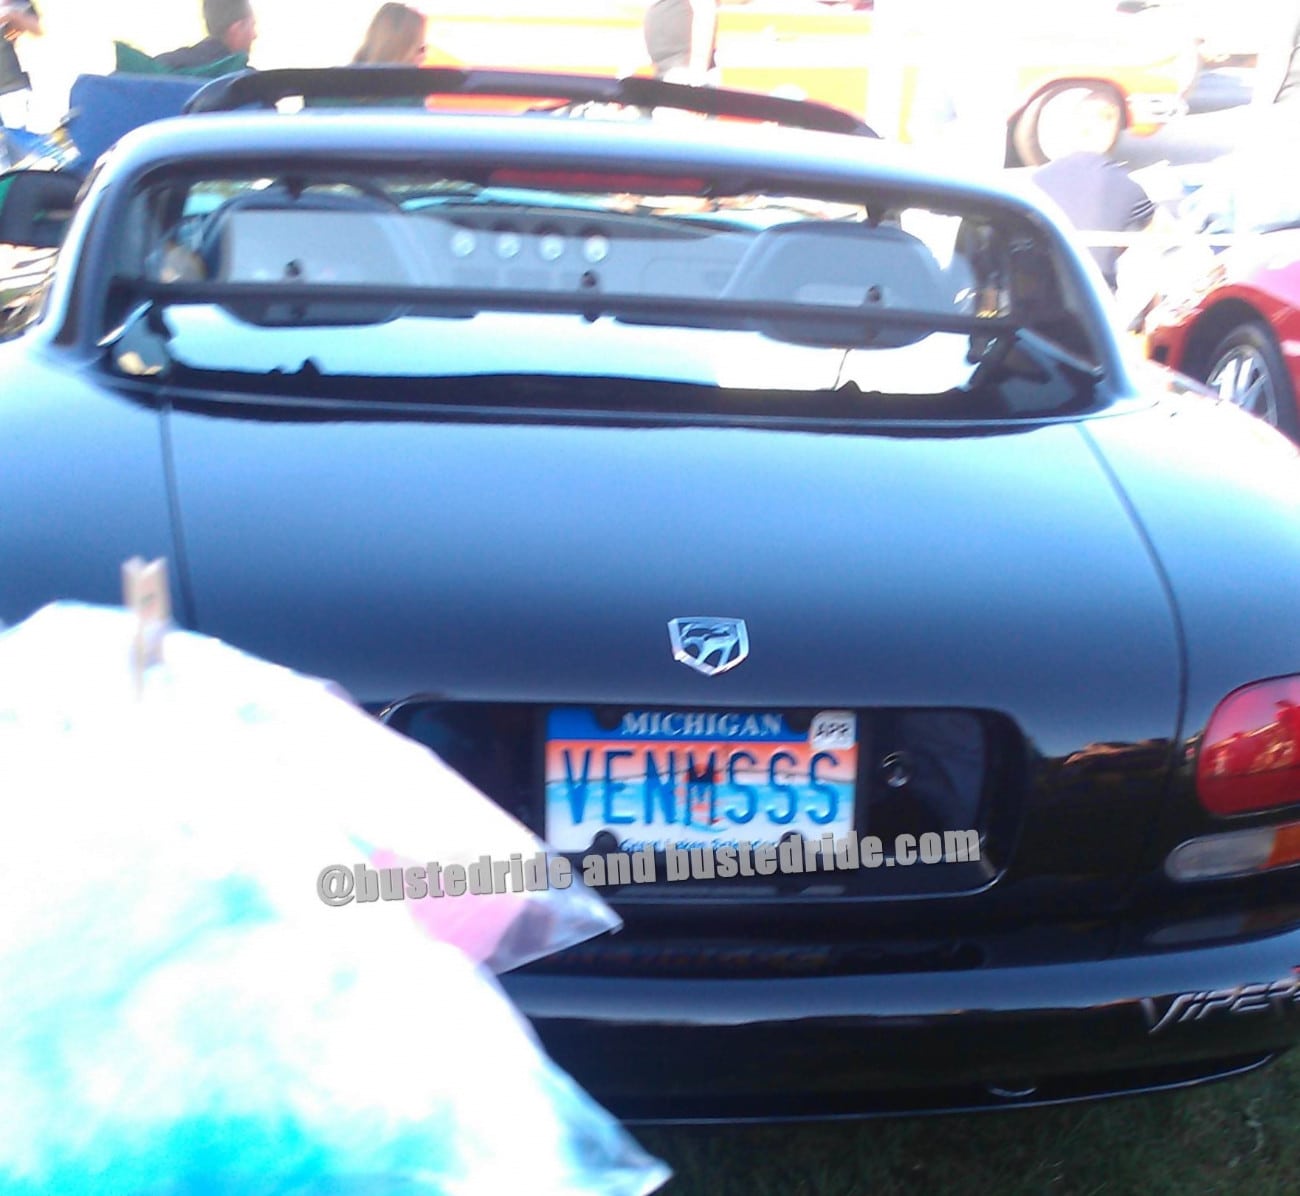 VENMSSS - Vanity License Plate by Busted Ride